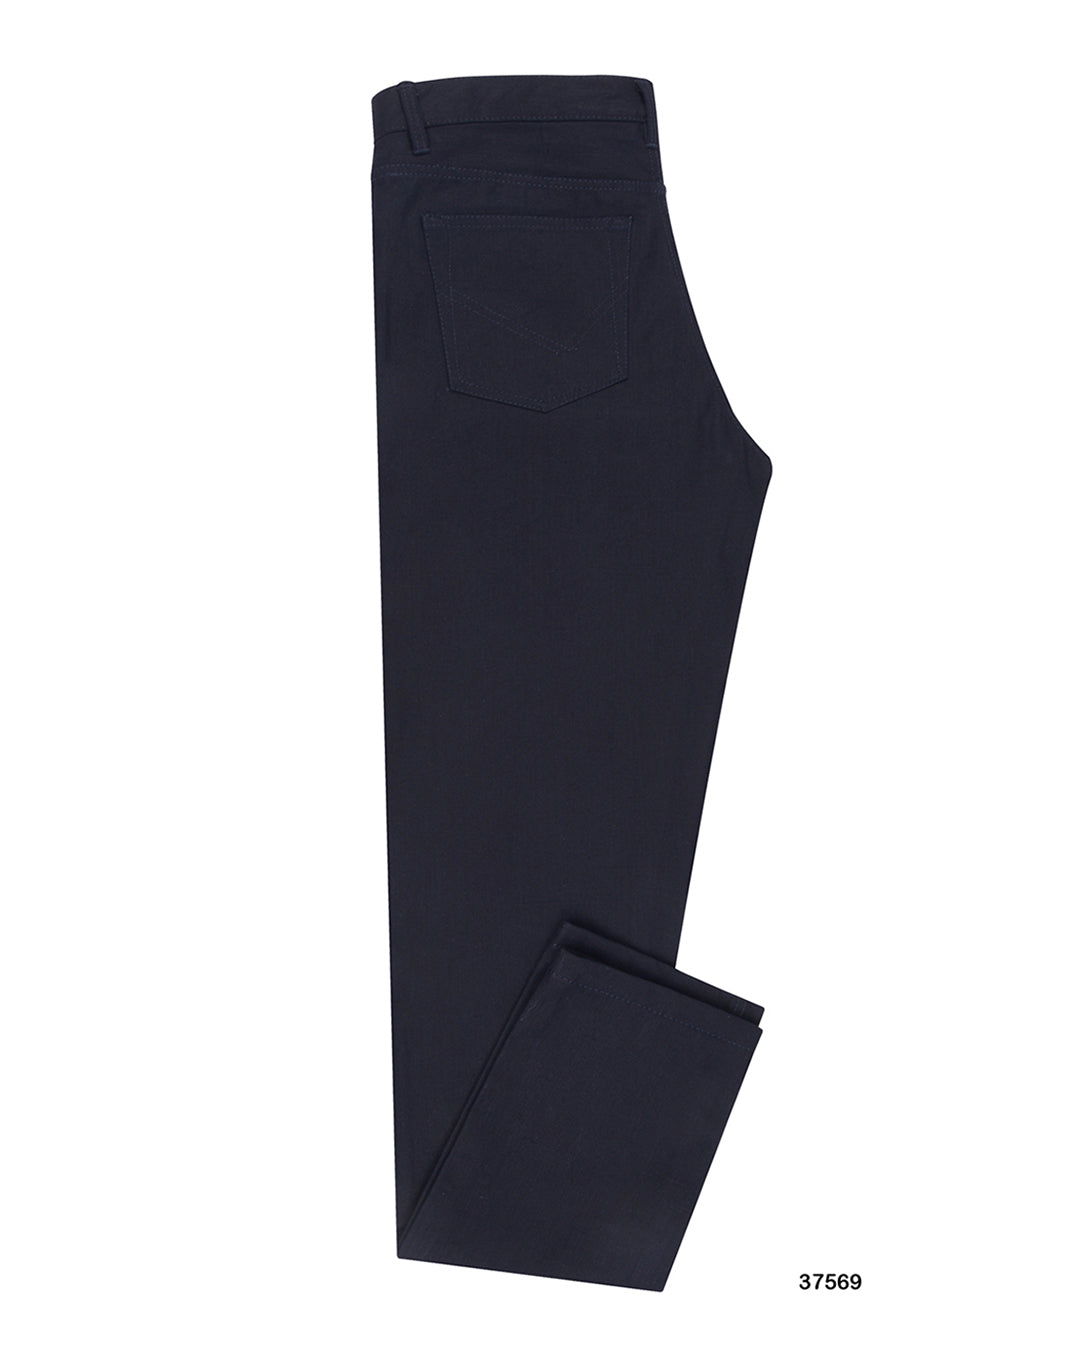 Side view of custom chino jeans for men by Luxire in navy